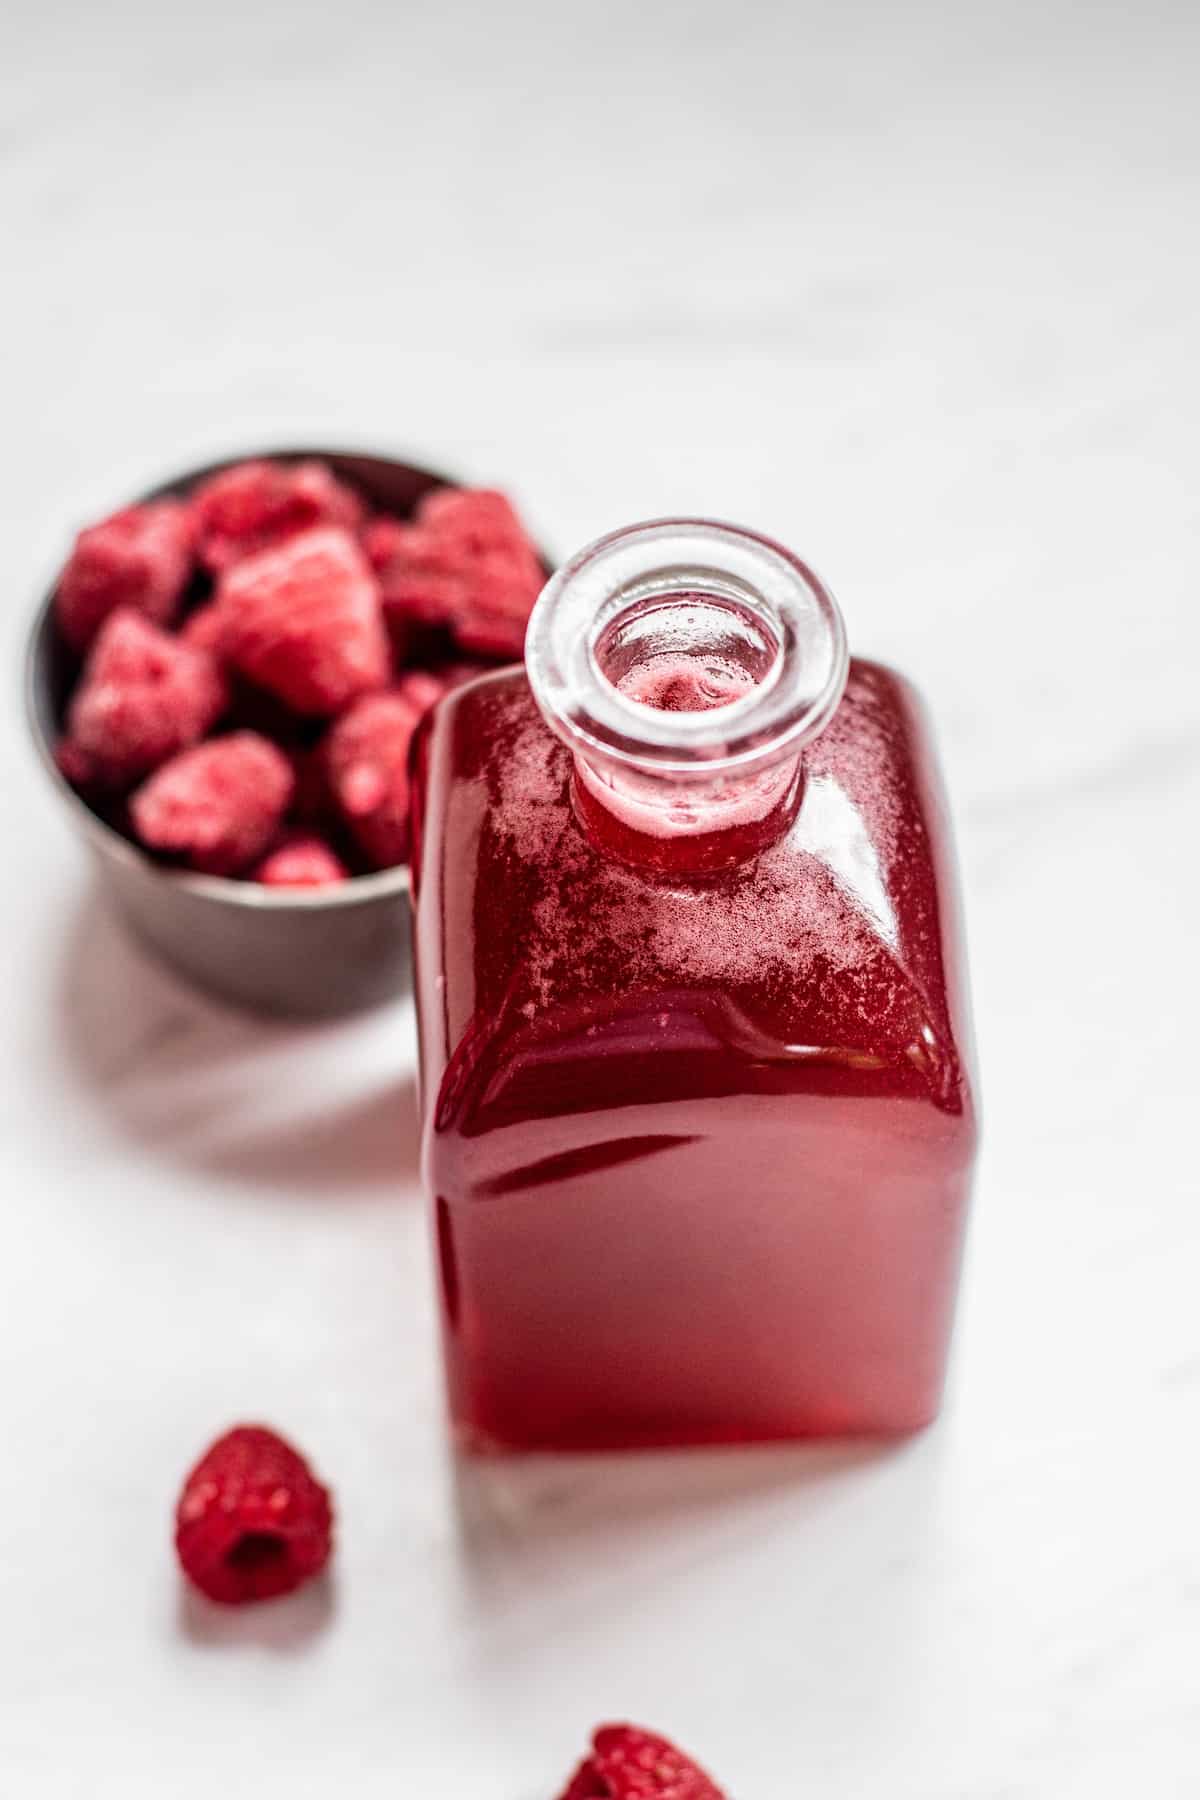 red syrup with raspberries in the background.